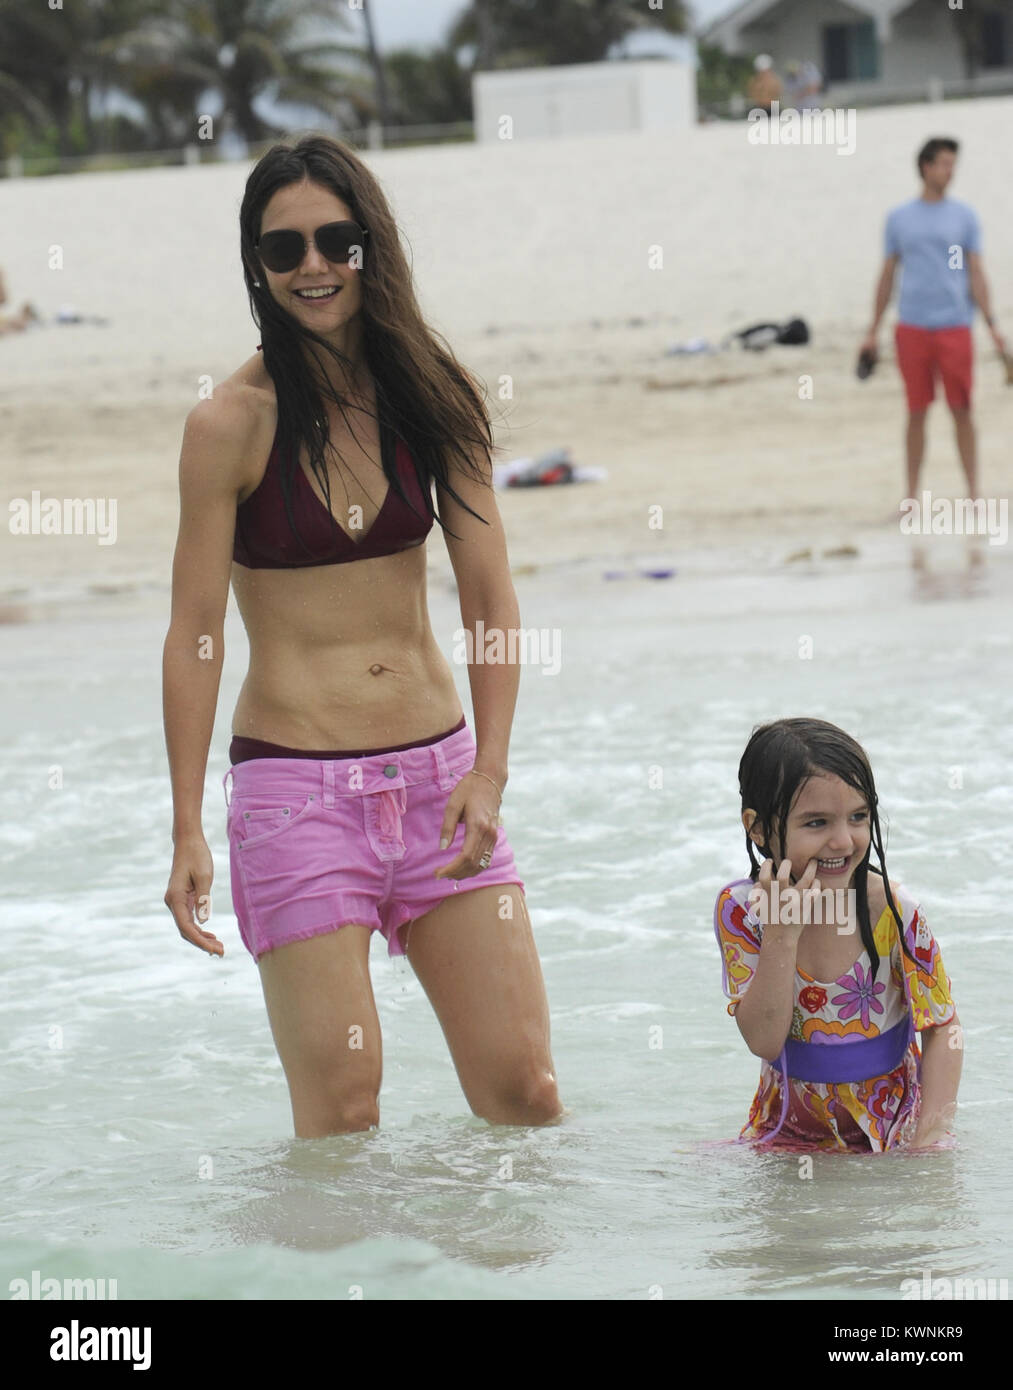 MIAMI BEACH, FL - JUNE 18: Katie Holmes and Suri Cruise had a fun day out  on beach today in Miami, outside their hotel. The famous mother and  daughter pair played in